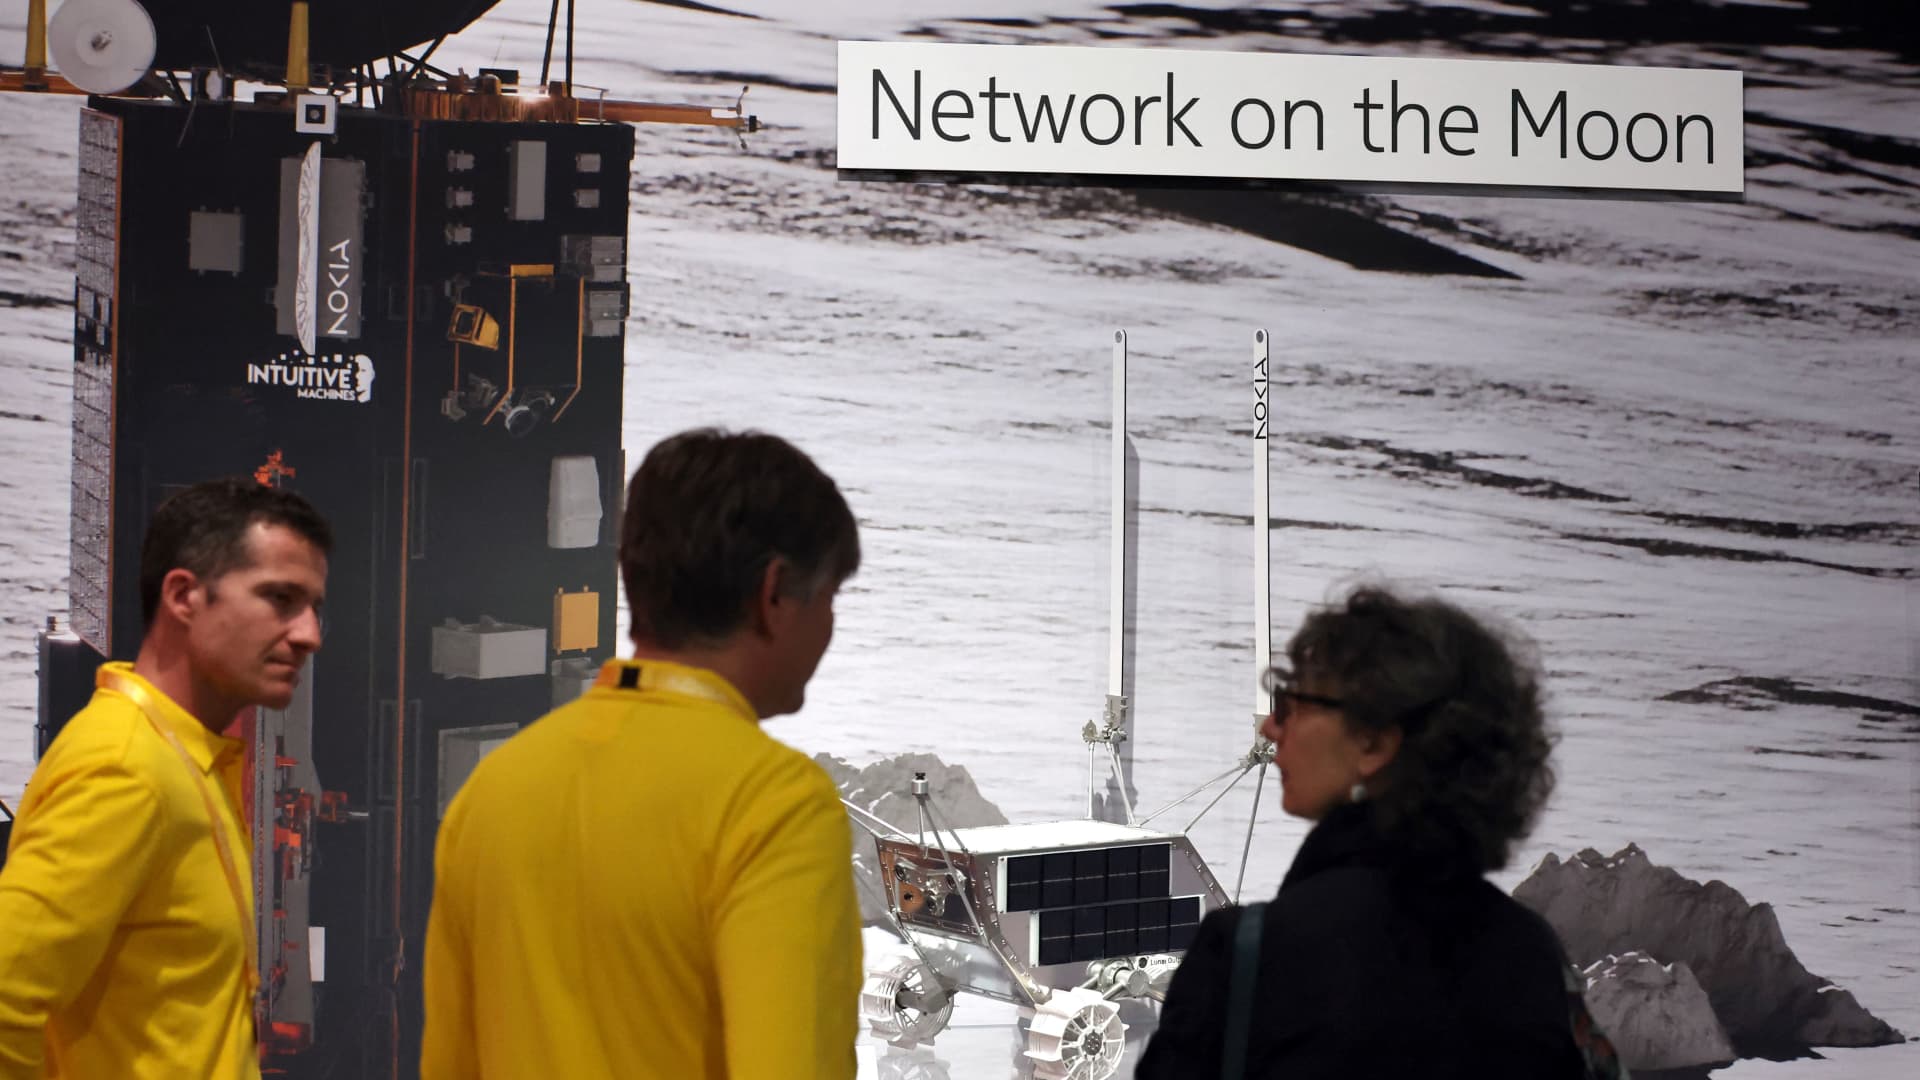 4G web is about to reach on the moon later this yr